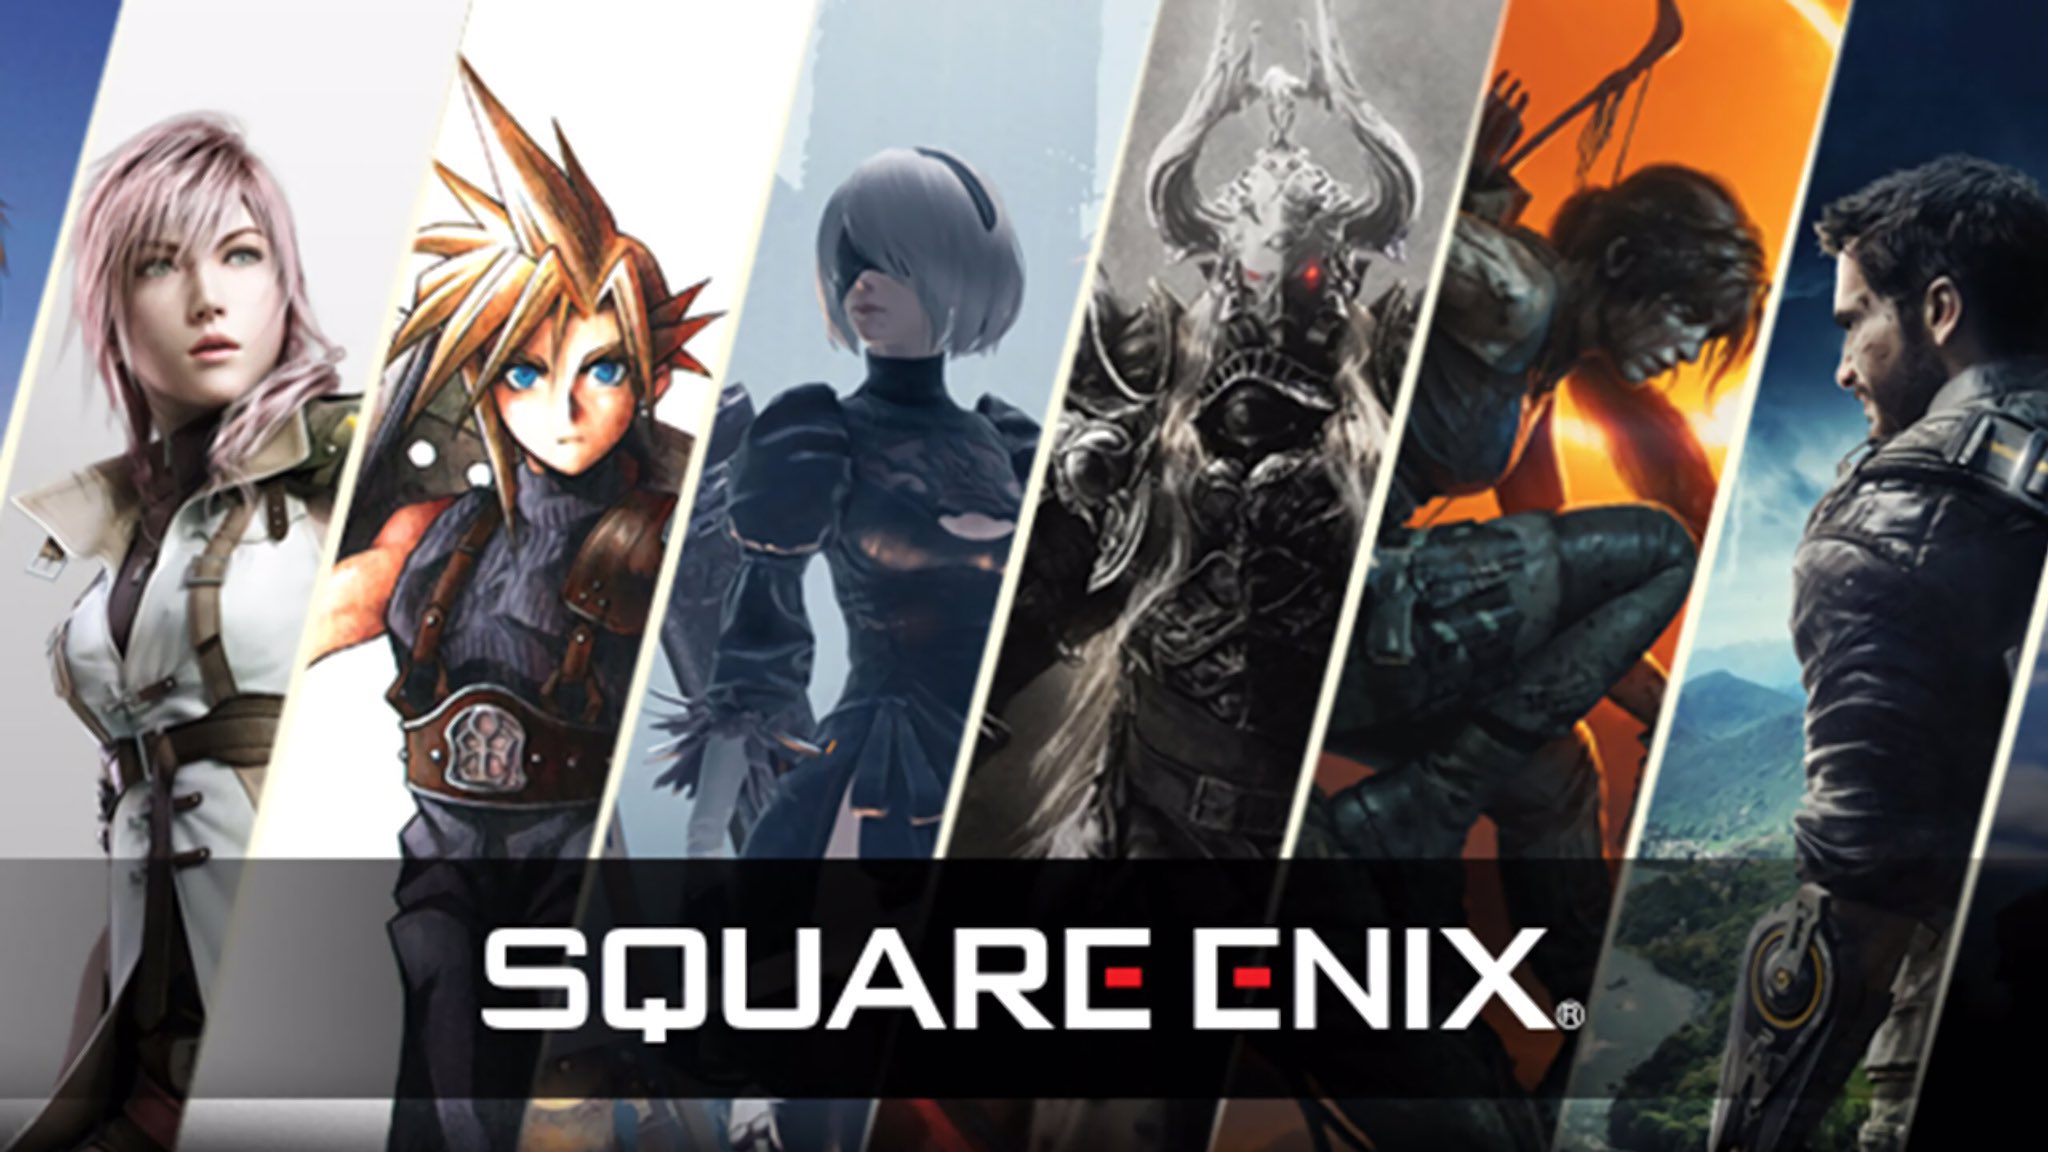 A week after selling its Western studios, Square Enix says it will